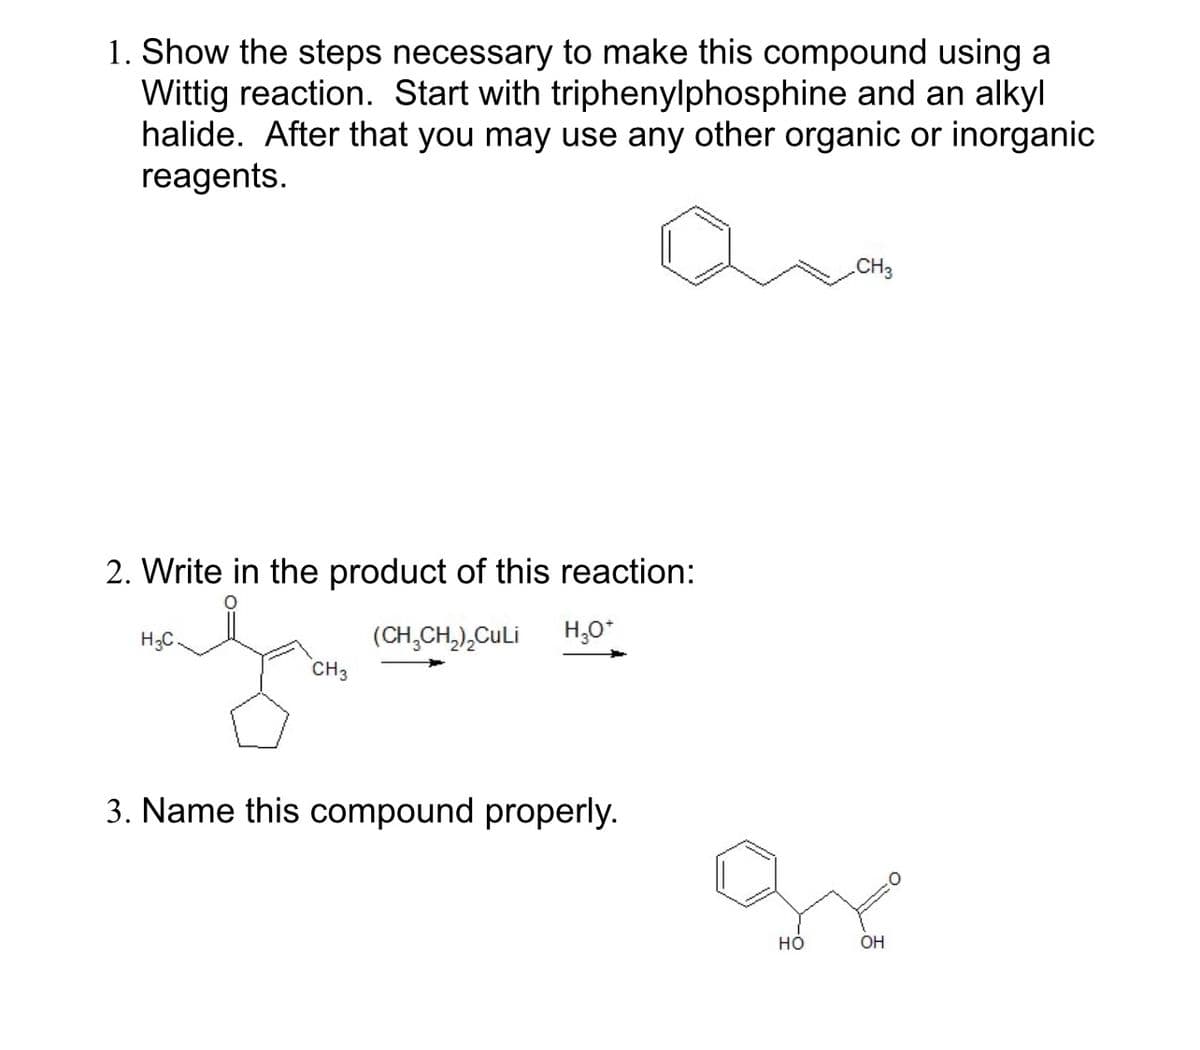 1. Show the steps necessary to make this compound using a
Wittig reaction. Start with triphenylphosphine and an alkyl
halide. After that you may use any other organic or inorganic
reagents.
2. Write in the product of this reaction:
H3C
(CH3CH2)₂CuLi
CH3
H₂O*
3. Name this compound properly.
CH3
HO
OH